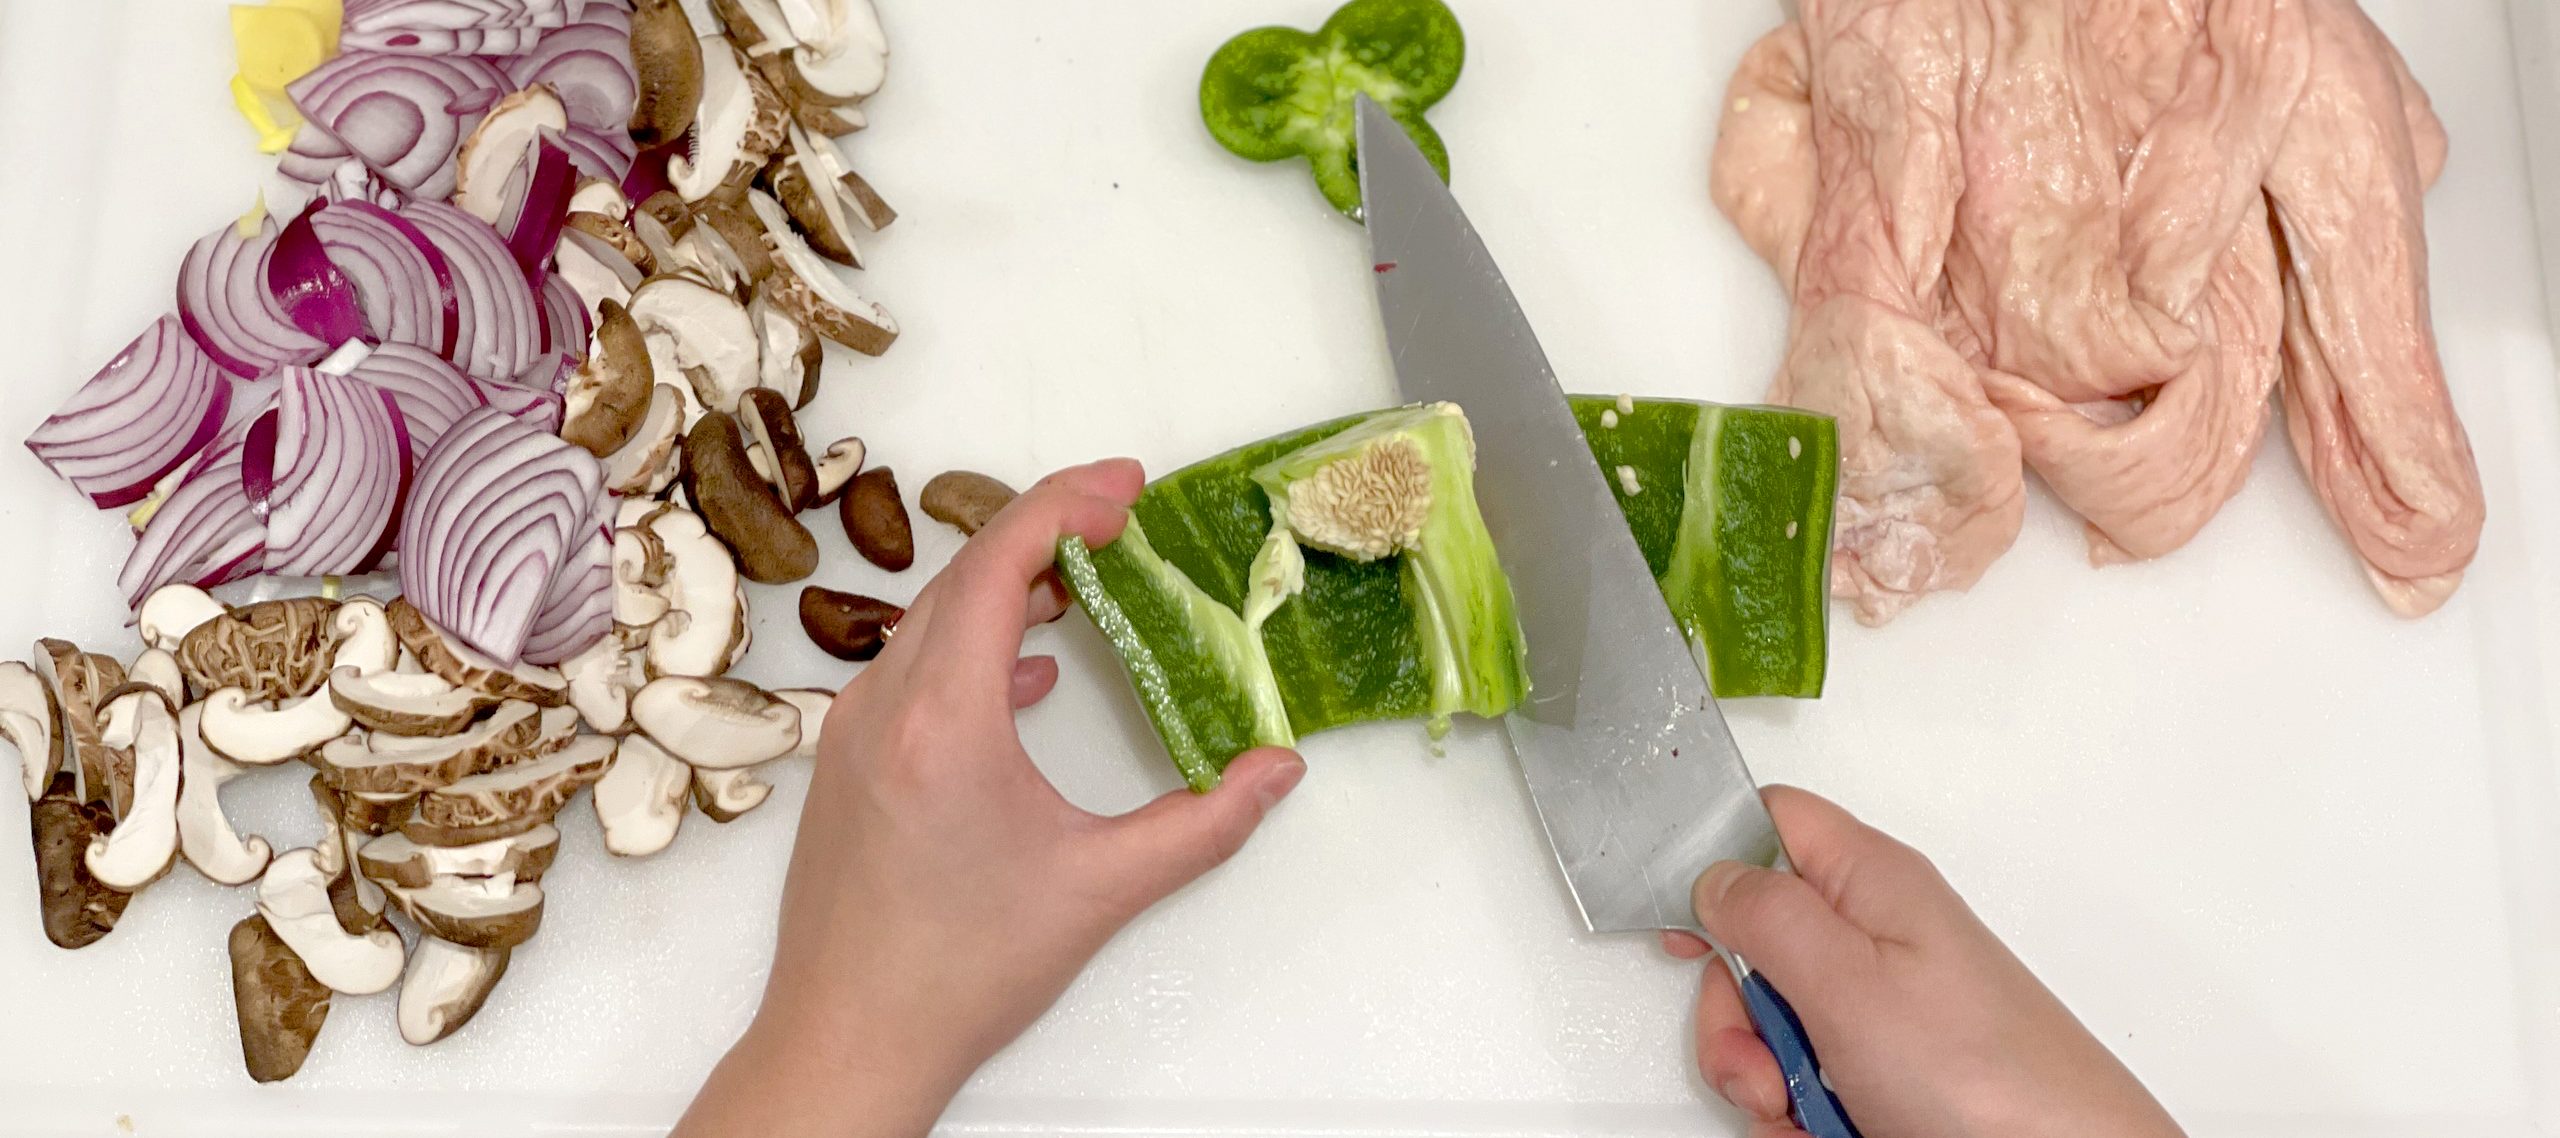 A pair of medium-light skinned hands slice the seeds out of a green pepper using a large knife on a white cutting board, seen from above. To the left is a pile of sliced mushrooms and red onions, and garlic. On the right is the raw skin of a chicken carcass.